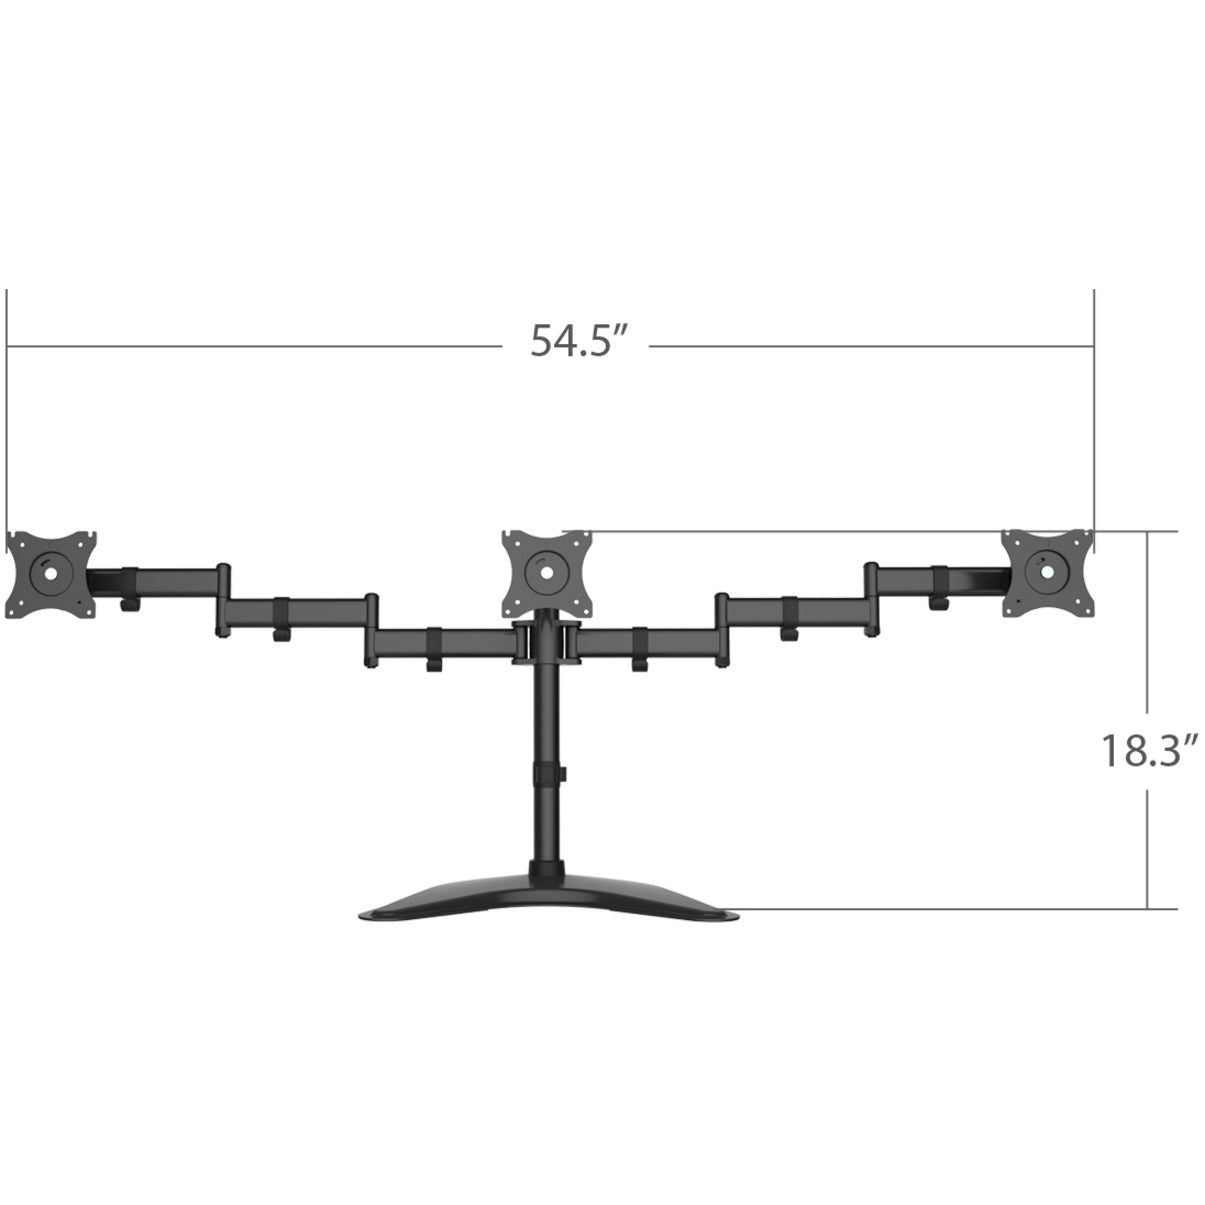 SIIG CE-MT1V12-S1 Articulated Freestanding Triple Monitor Desk Stand - 13"-27", Swivel, Tilt, Ergonomic, Cable Management, 360° Rotation, 5 Year Warranty